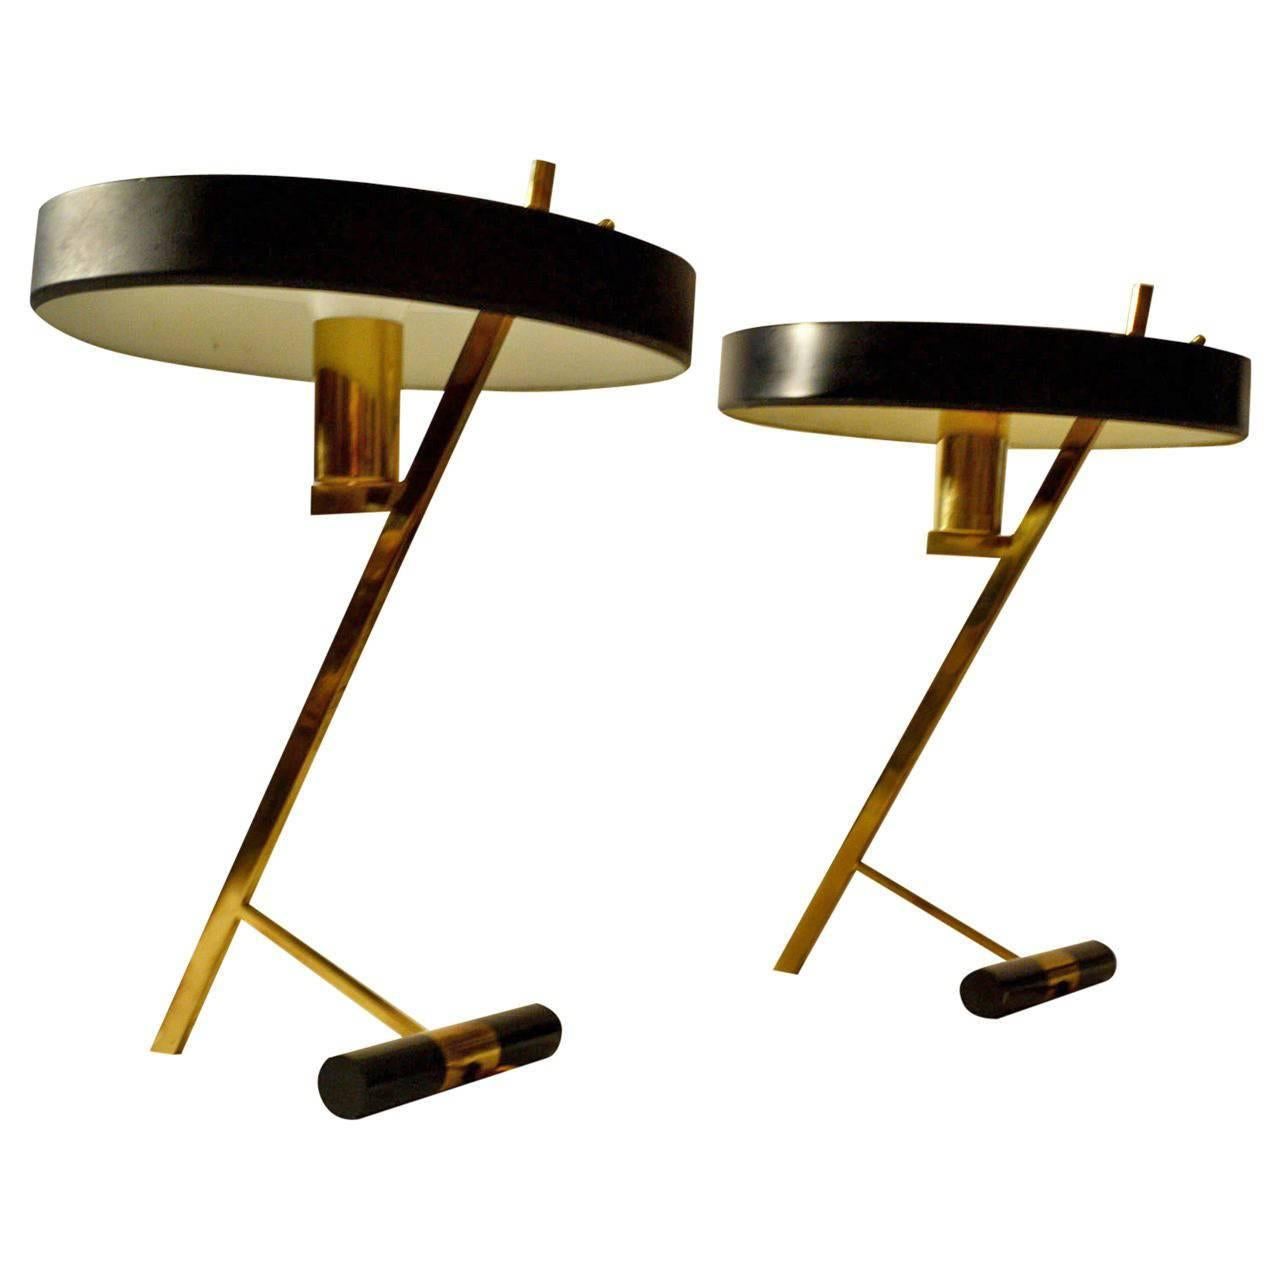 Iconic table or desk lamps in brass and black metal shade designed in 1955 by Louis Kalff for Philips. On the top it shows the manufacturers tag.
They are in great condition, the black shades have been recoated.
Louis Kalff was a multifaceted